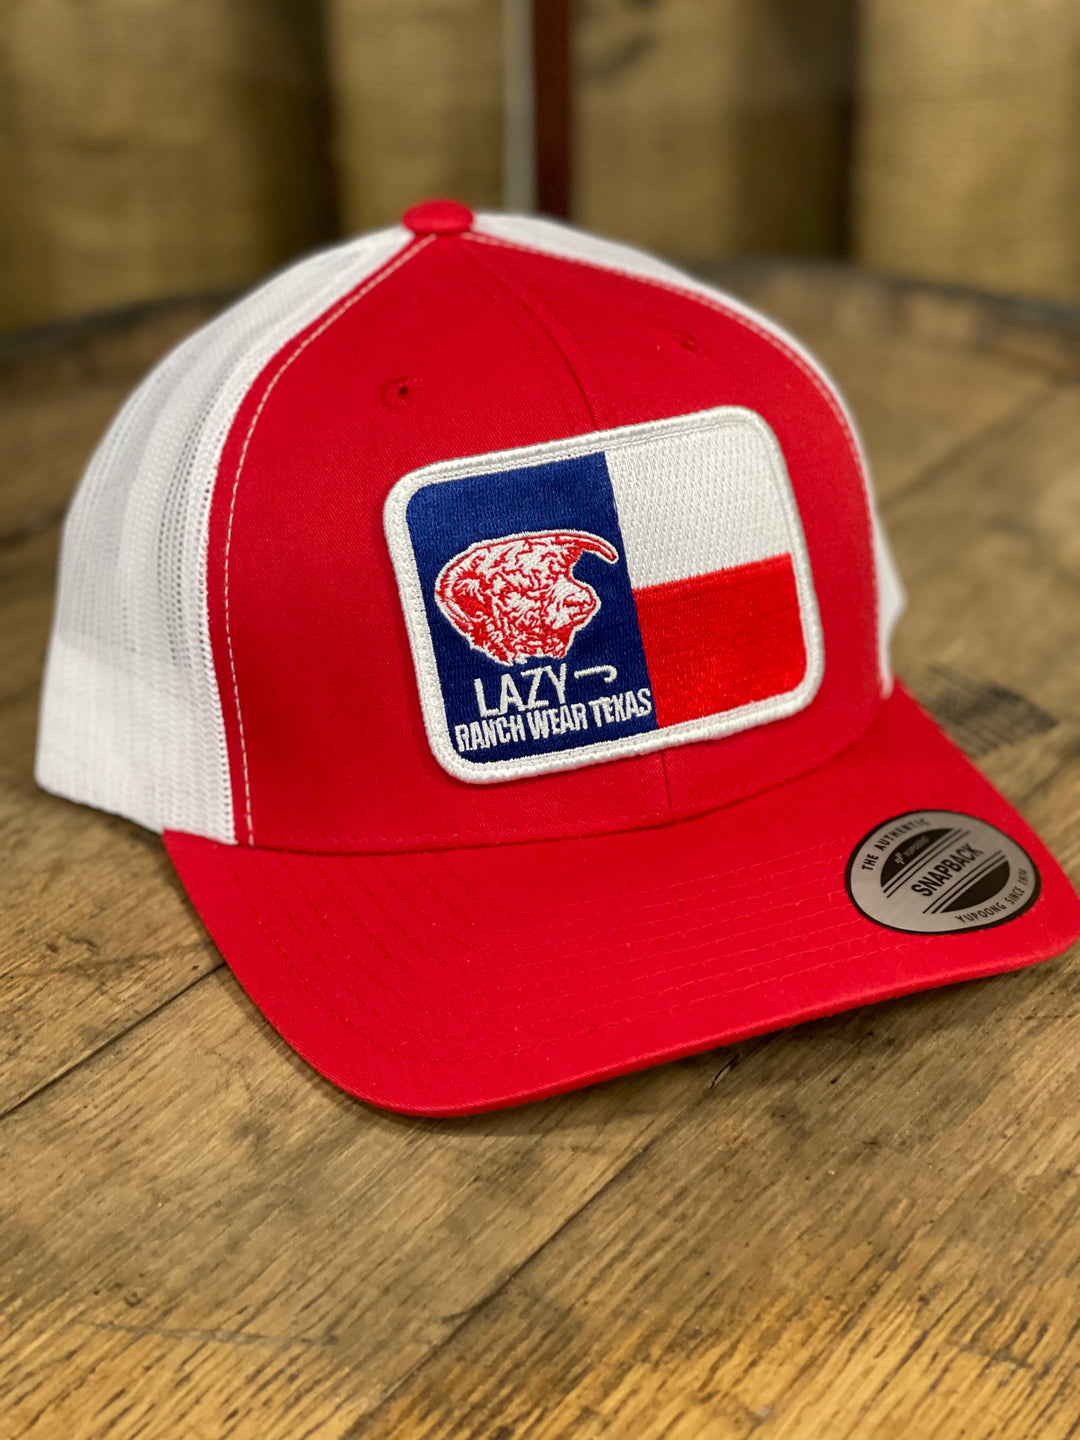 Lazy J Ranch Wear Red & White 3.5" Texas Flag Elevation Cap